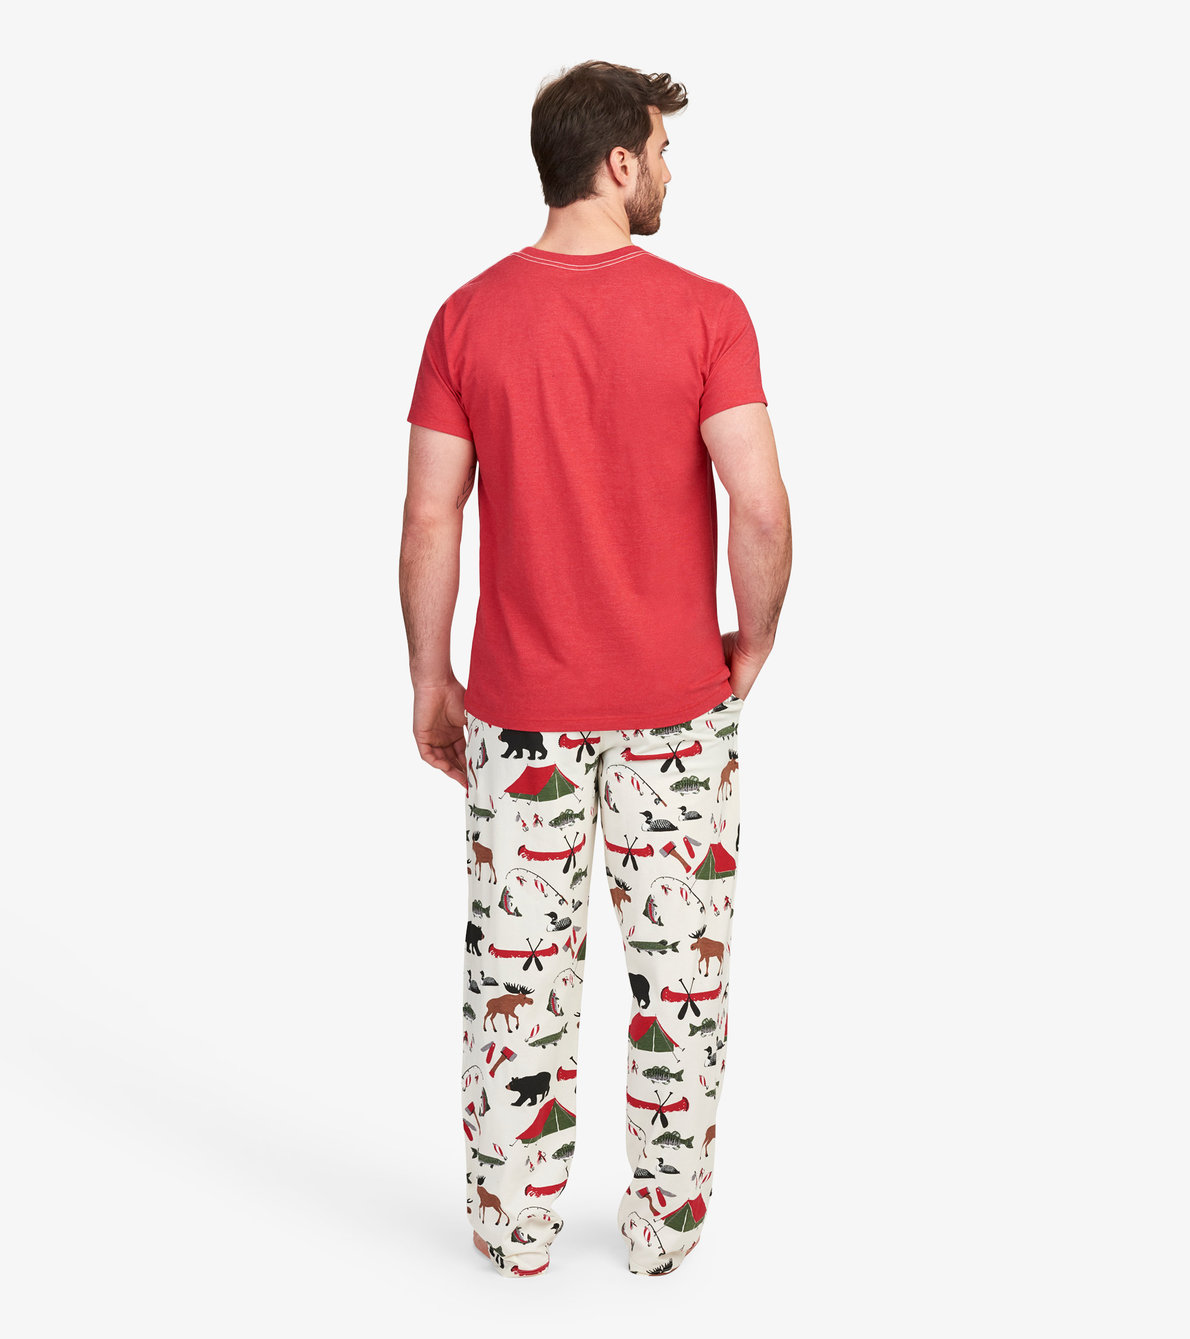 View larger image of Happy Camper Men's Tee and Pants Pajama Separates